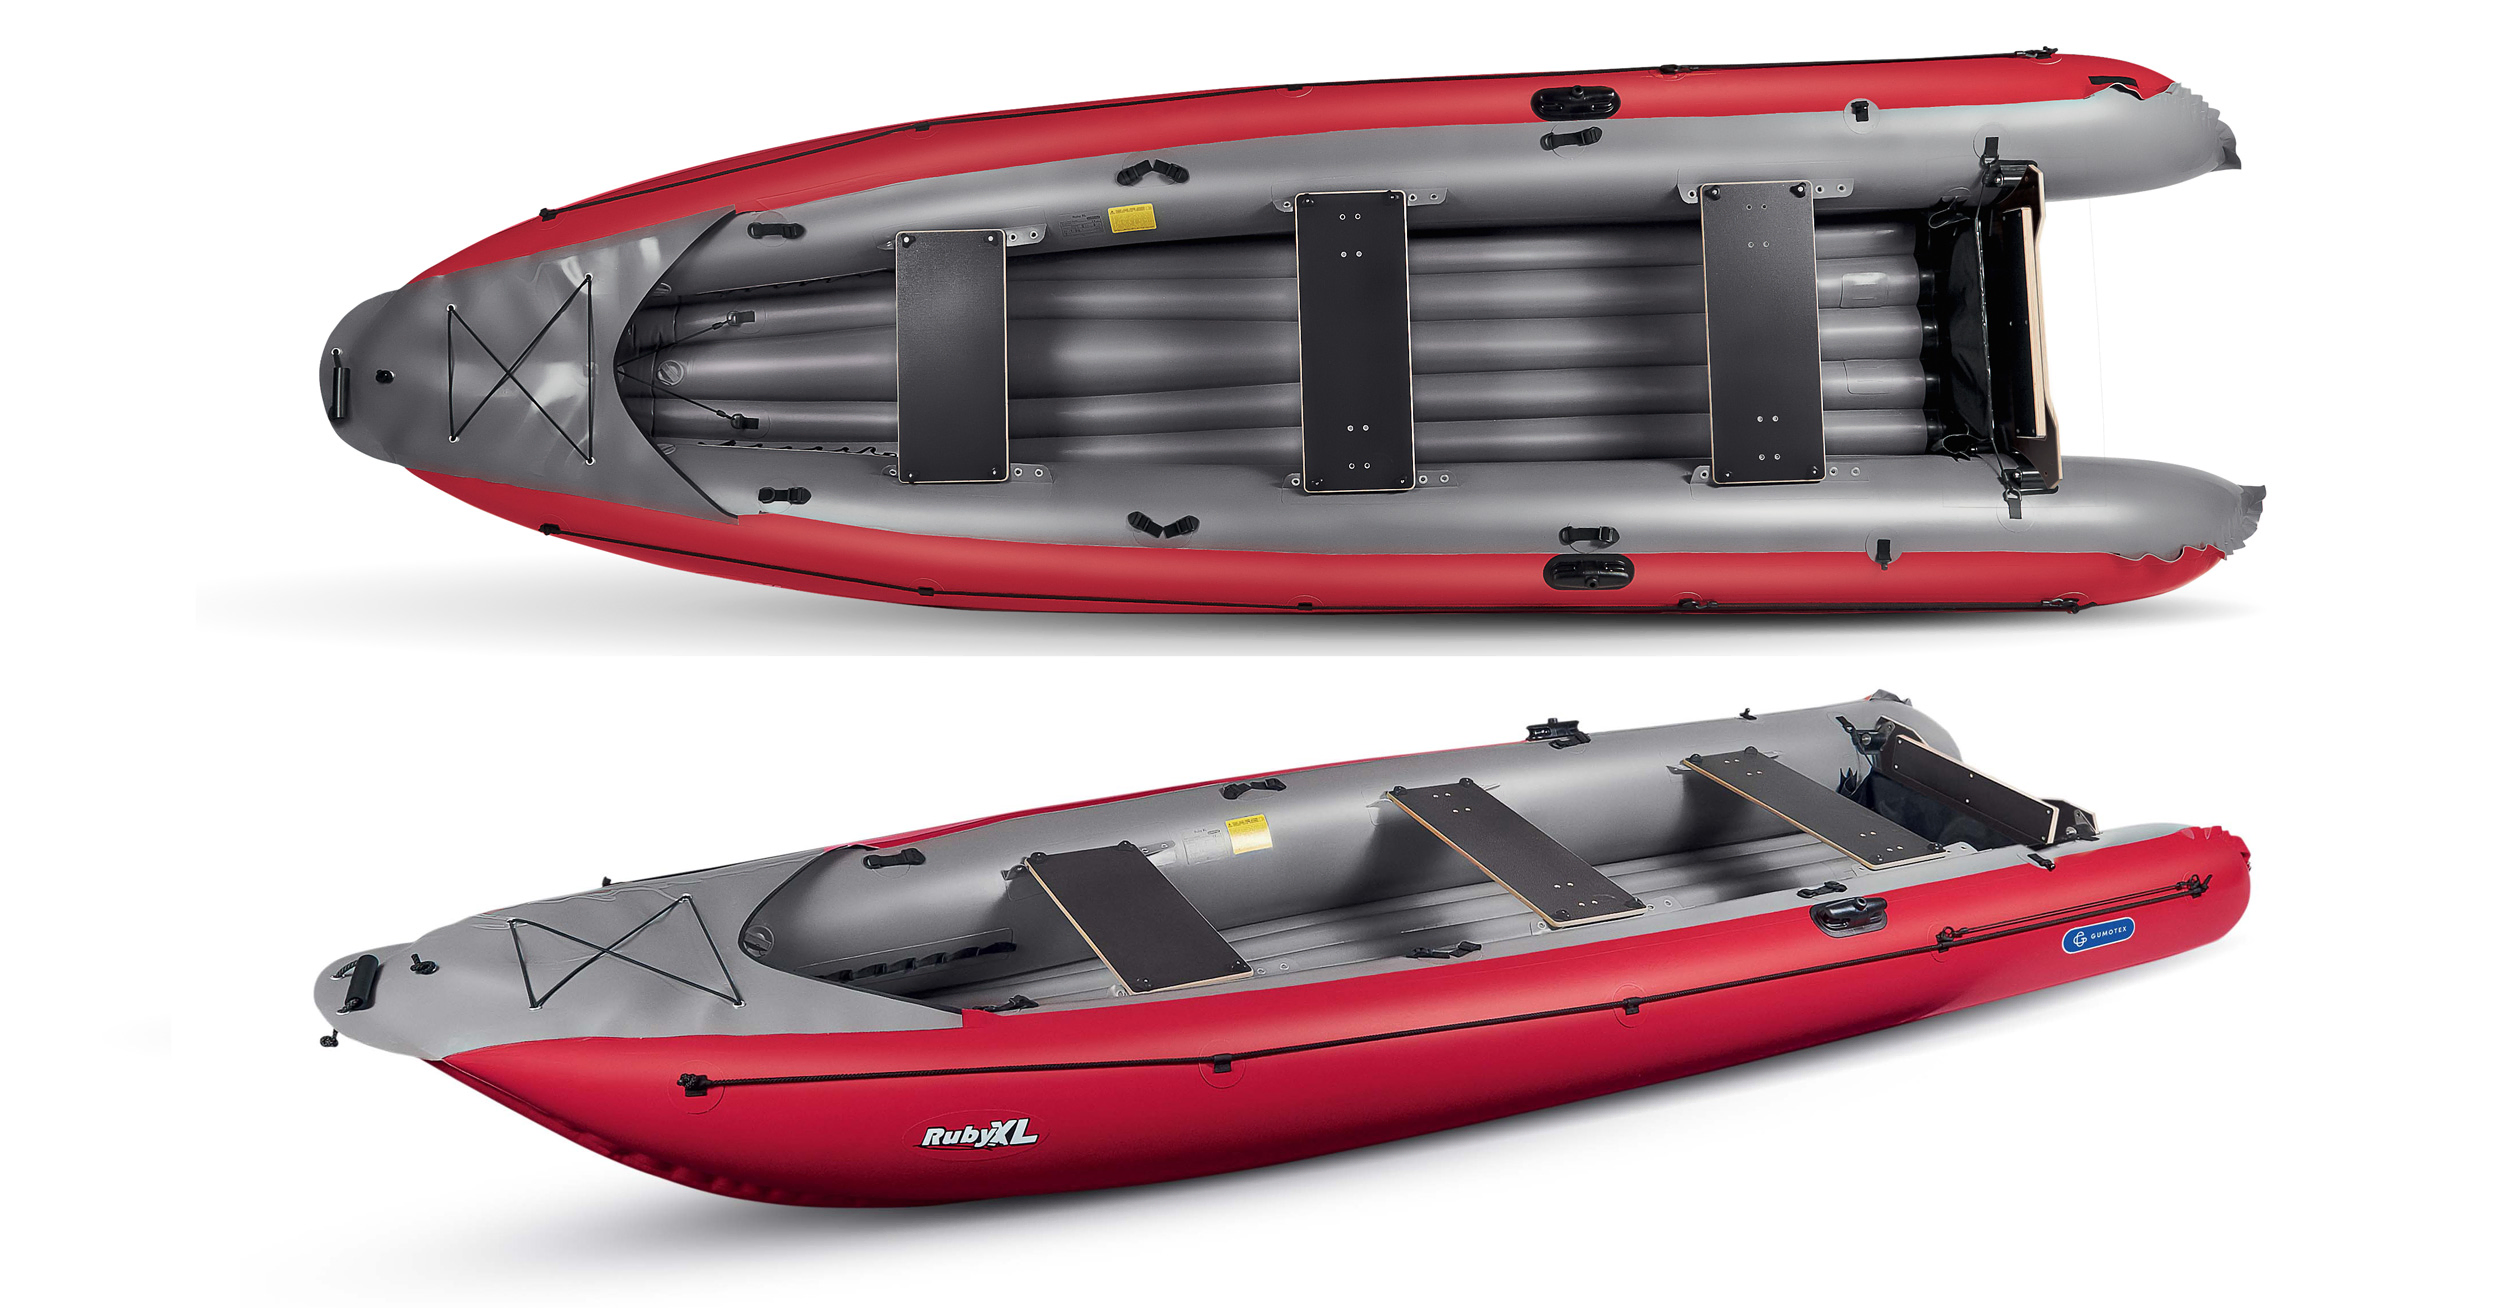 Gumotex Ruby XL Inflatable Boat